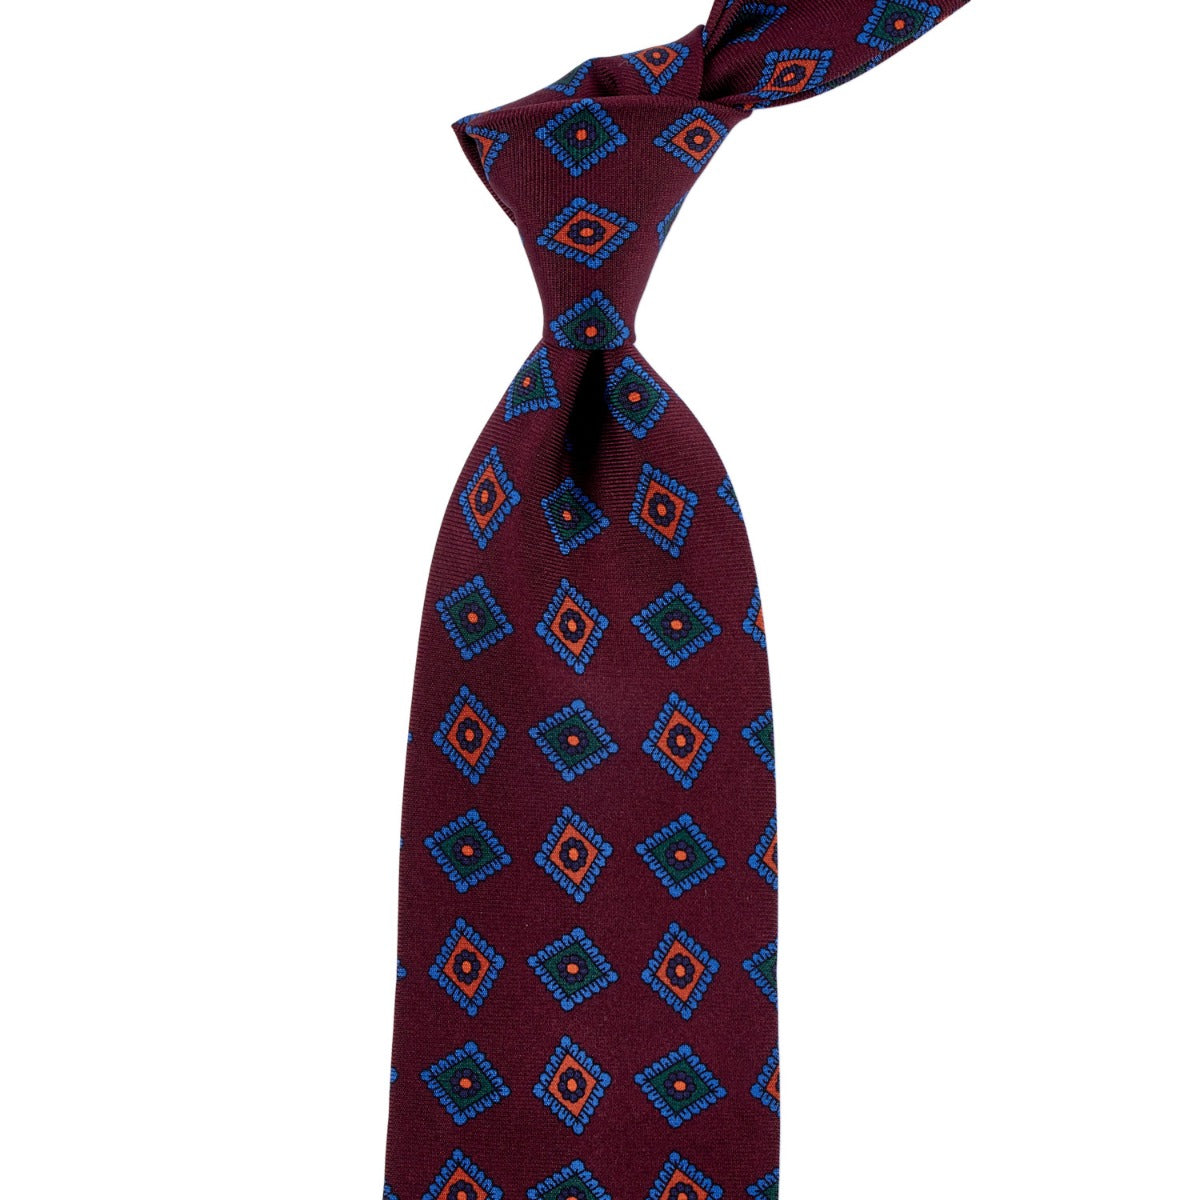 A Sovereign Grade Burgundy Art Deco Ancient Madder Silk Tie with blue and red diamonds of quality craftsmanship, made in the United Kingdom from KirbyAllison.com.